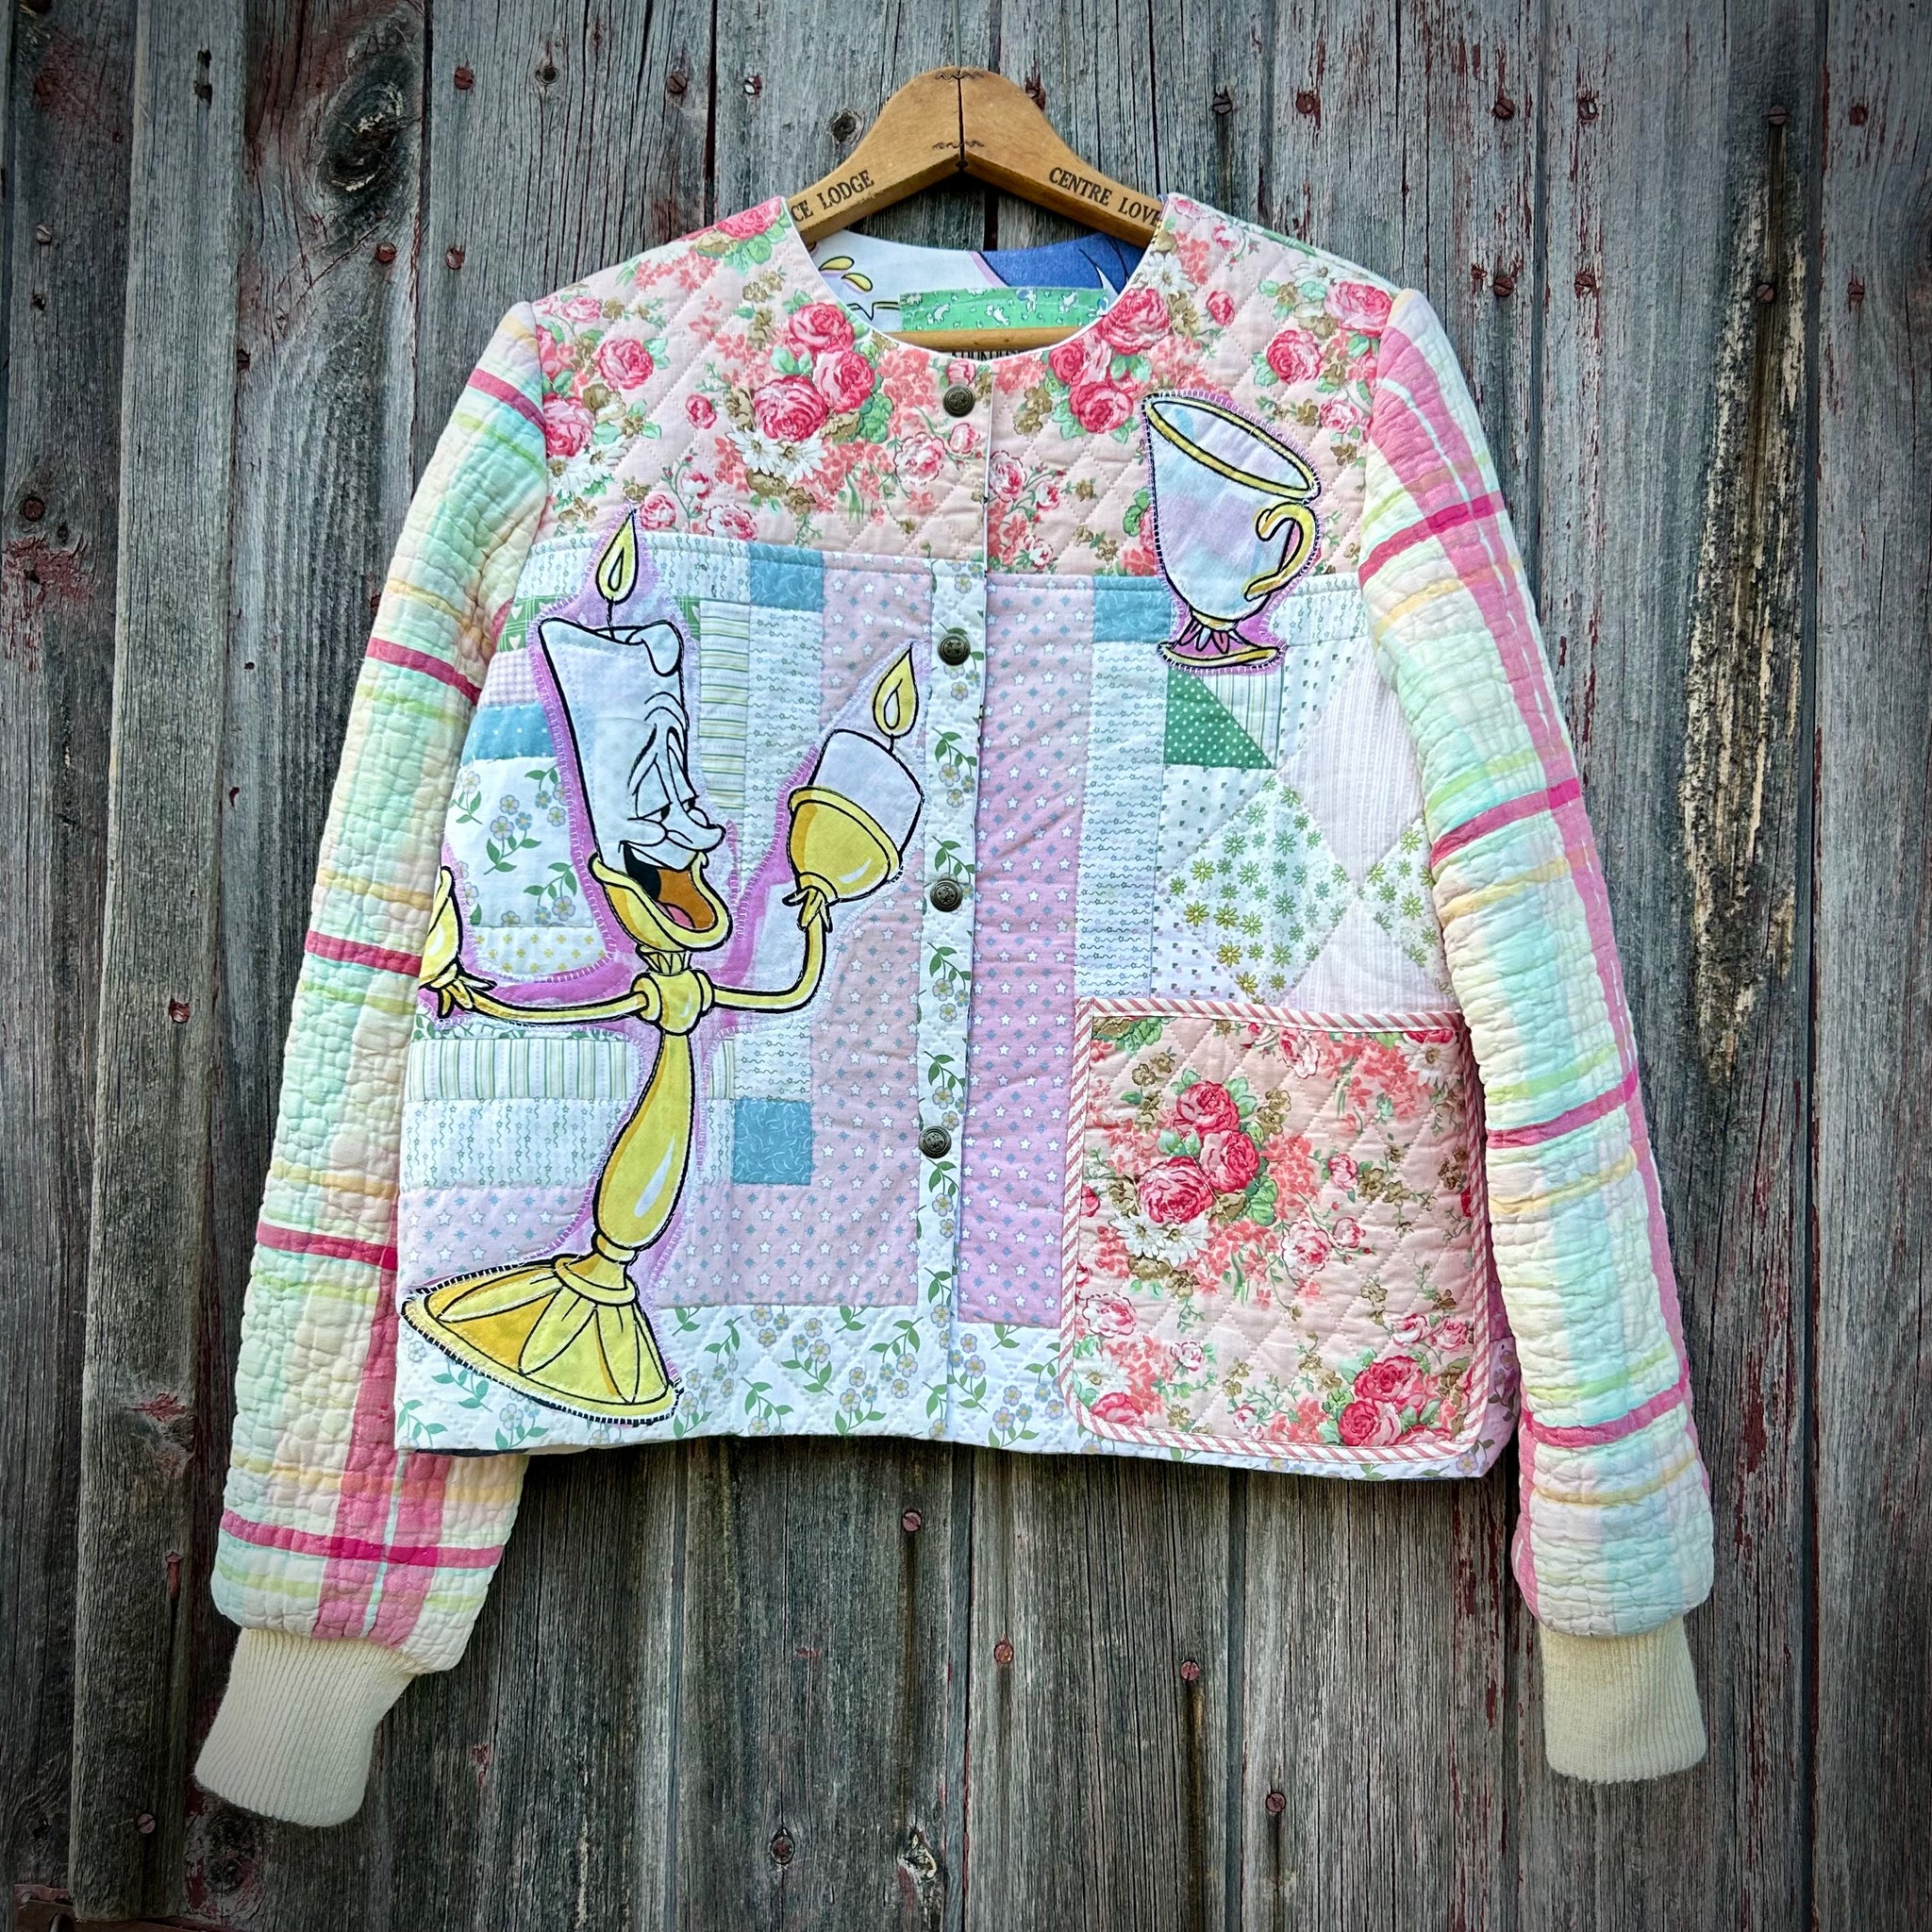 Quilted Jacket featuring Lumiere applique